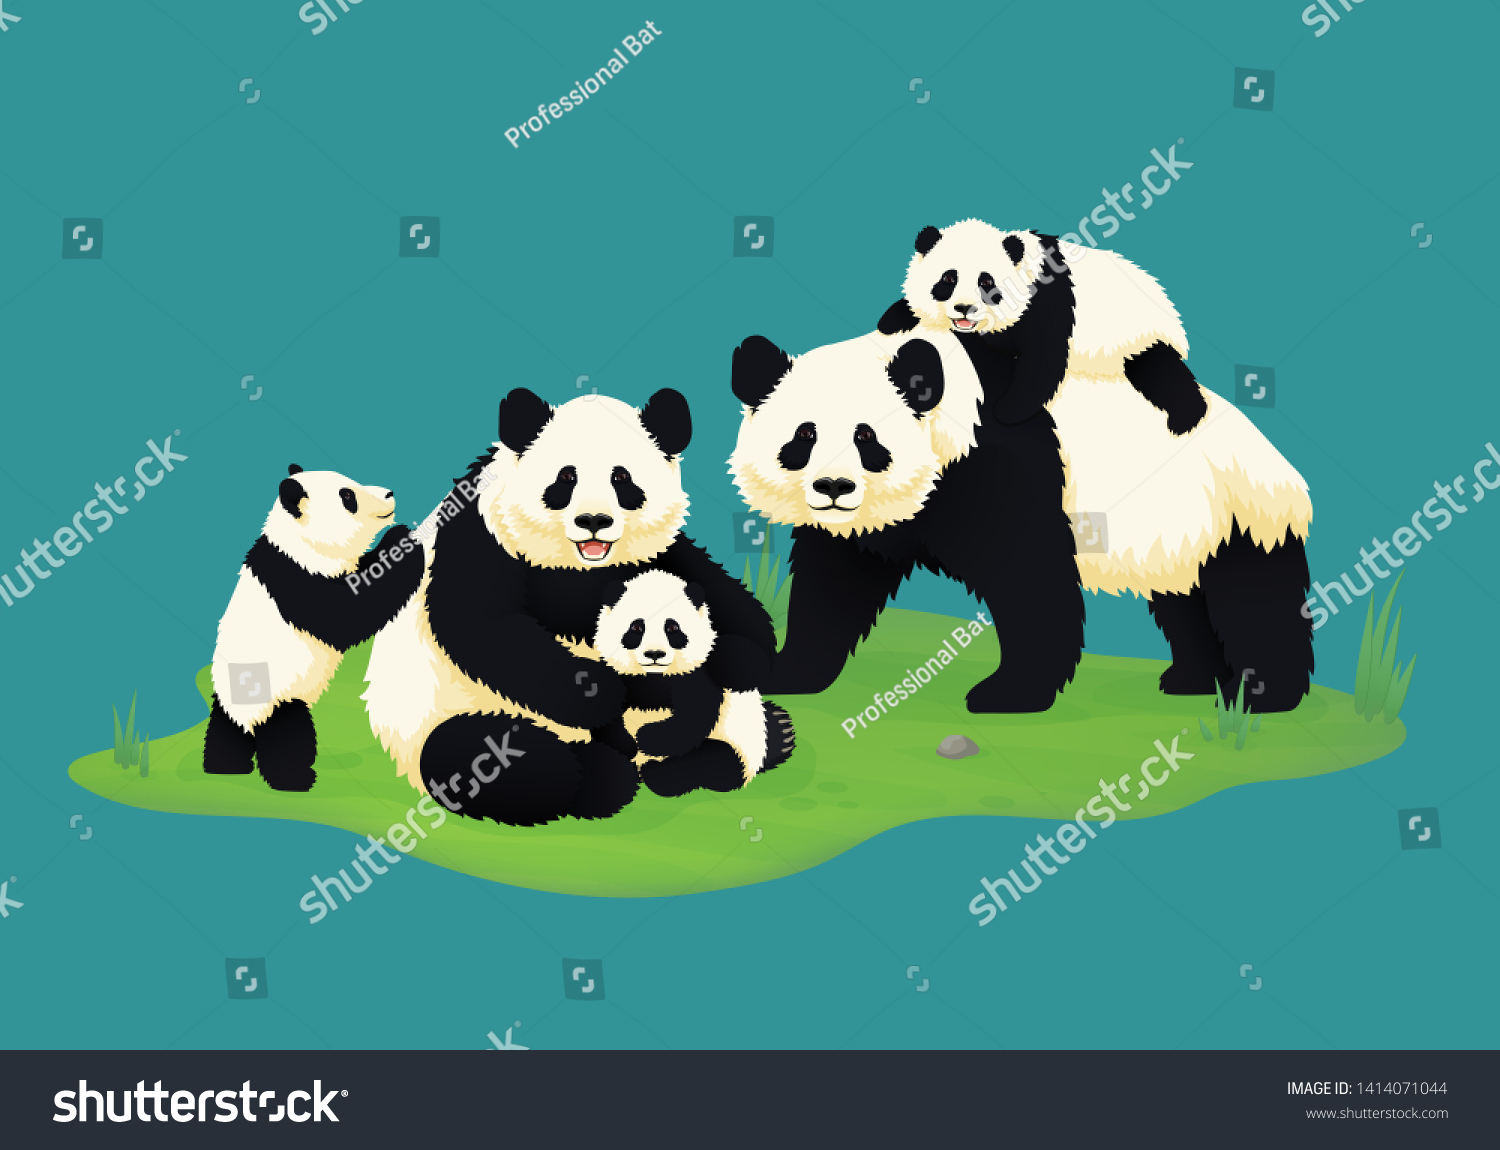 SVG of Giant panda family. Two adult pandas with three baby pandas. Chinese bears. Mother, father and children. Rare, vulnerable species. svg